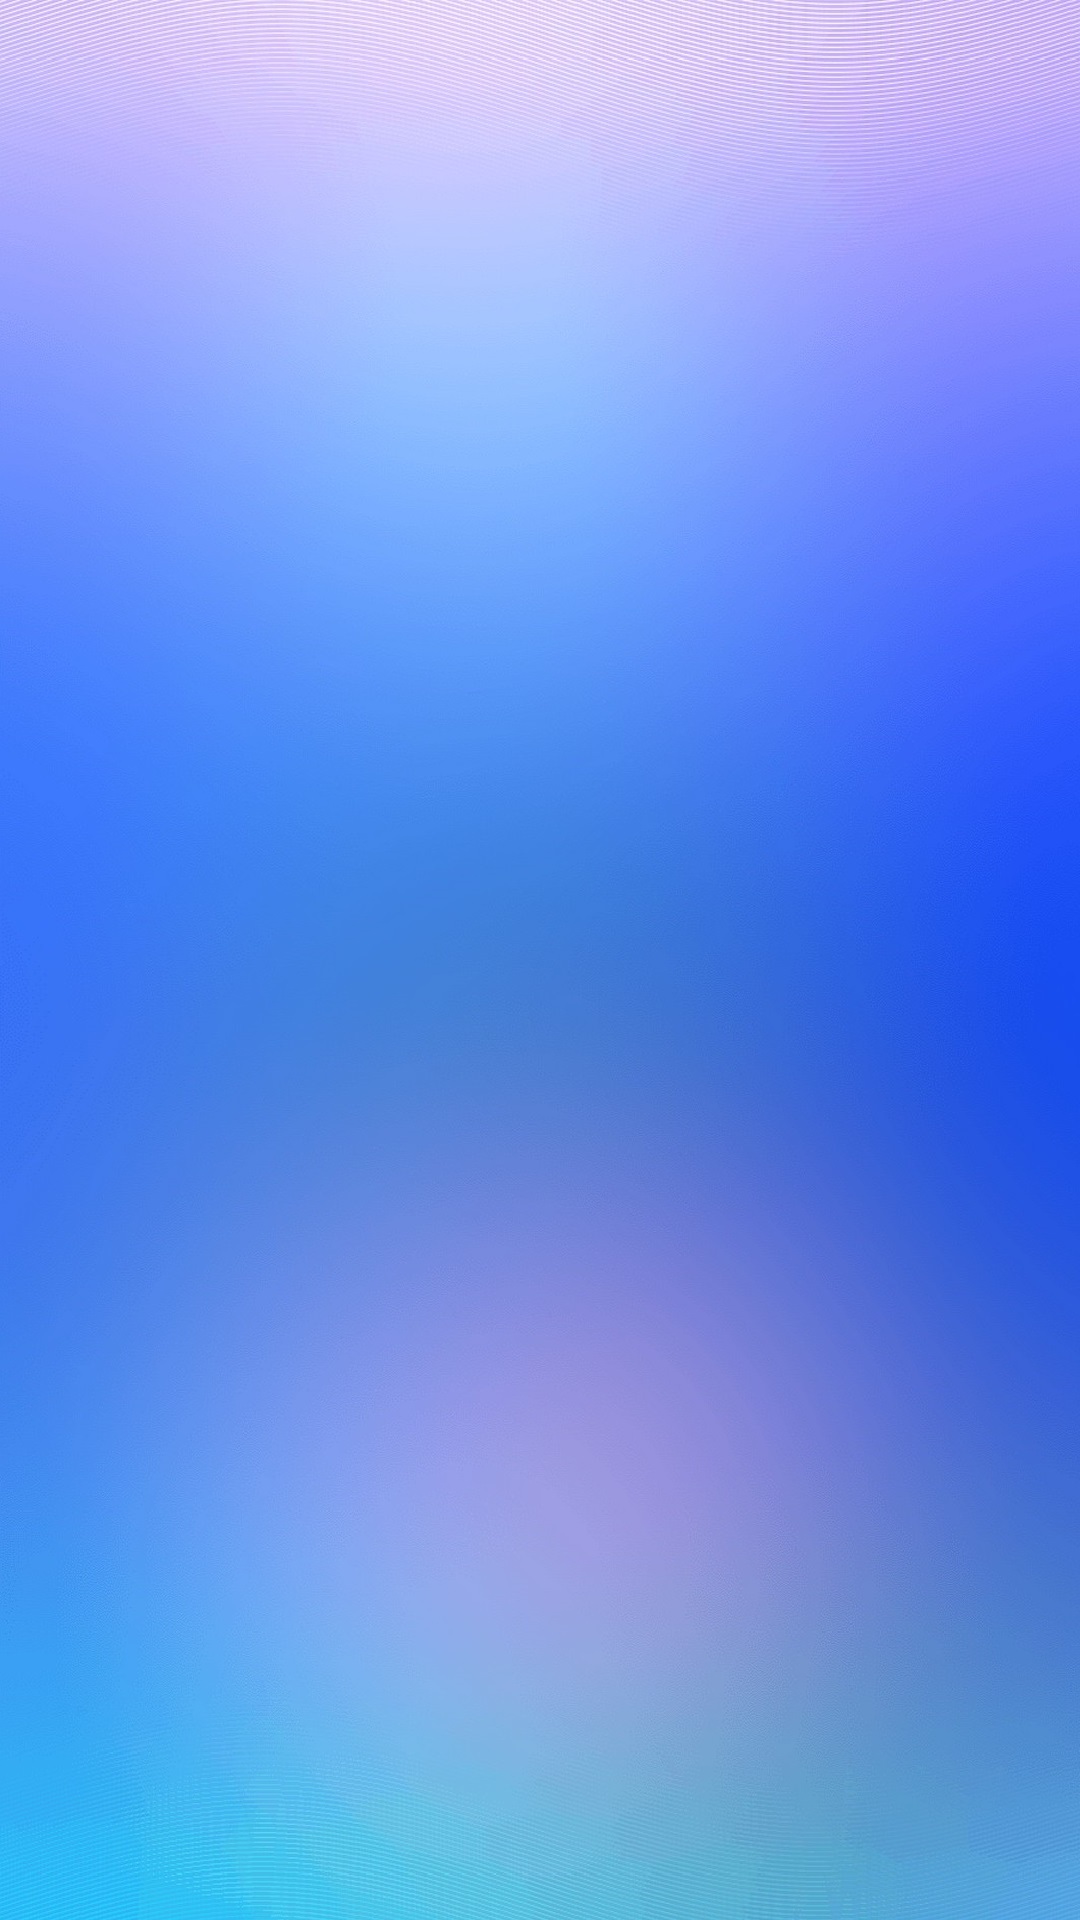 Gradient iPhone 7 Wallpaper HD with high-resolution 1080x1920 pixel. Download all Mobile Wallpapers and Use them as wallpapers for your iPhone, Tablet, iPad, Android and other mobile devices